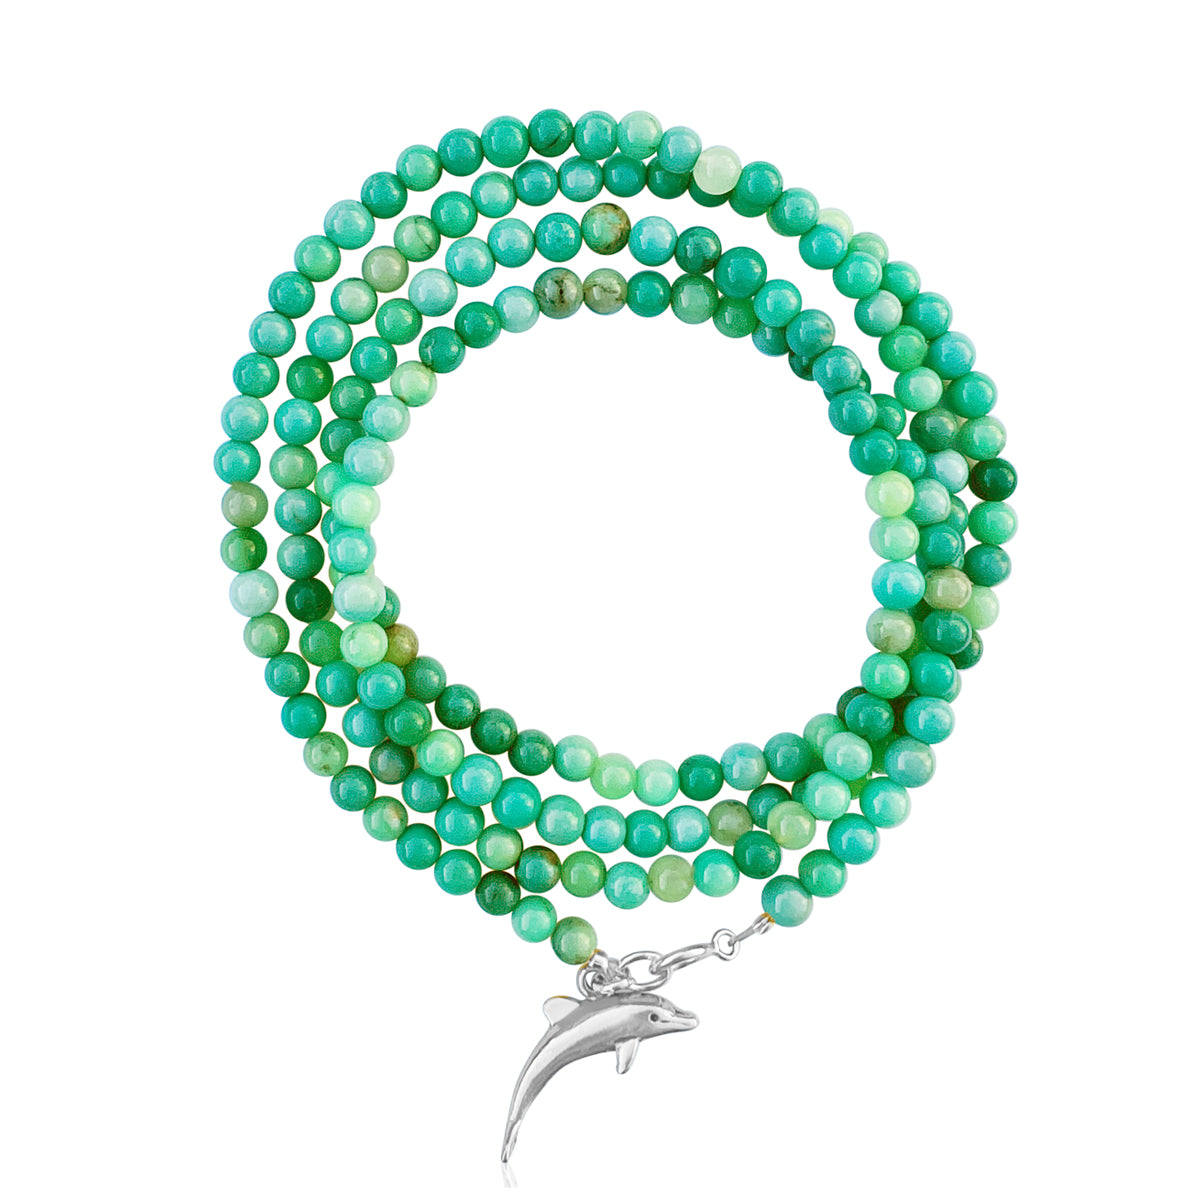 As you wear this Dolphin Spirit Wrap Bracelet, you'll feel a deep connection to the healing powers of the sea and the wisdom of the dolphins, guiding you on a journey of spiritual awakening and self-discovery.